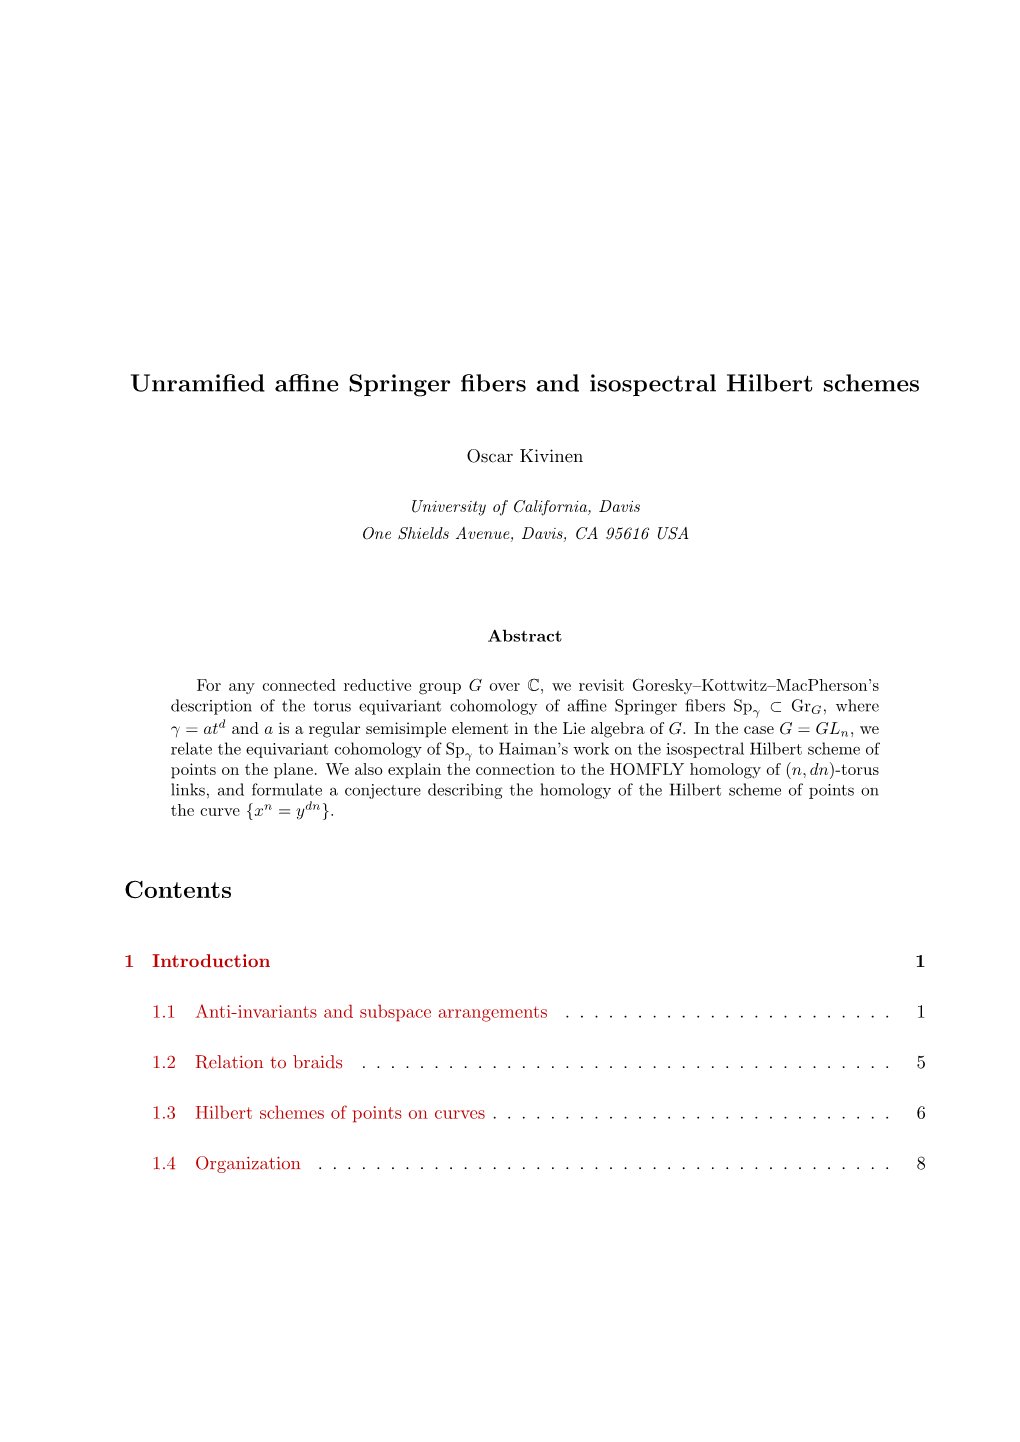 Unramified Affine Springer Fibers and Isospectral Hilbert Schemes Contents